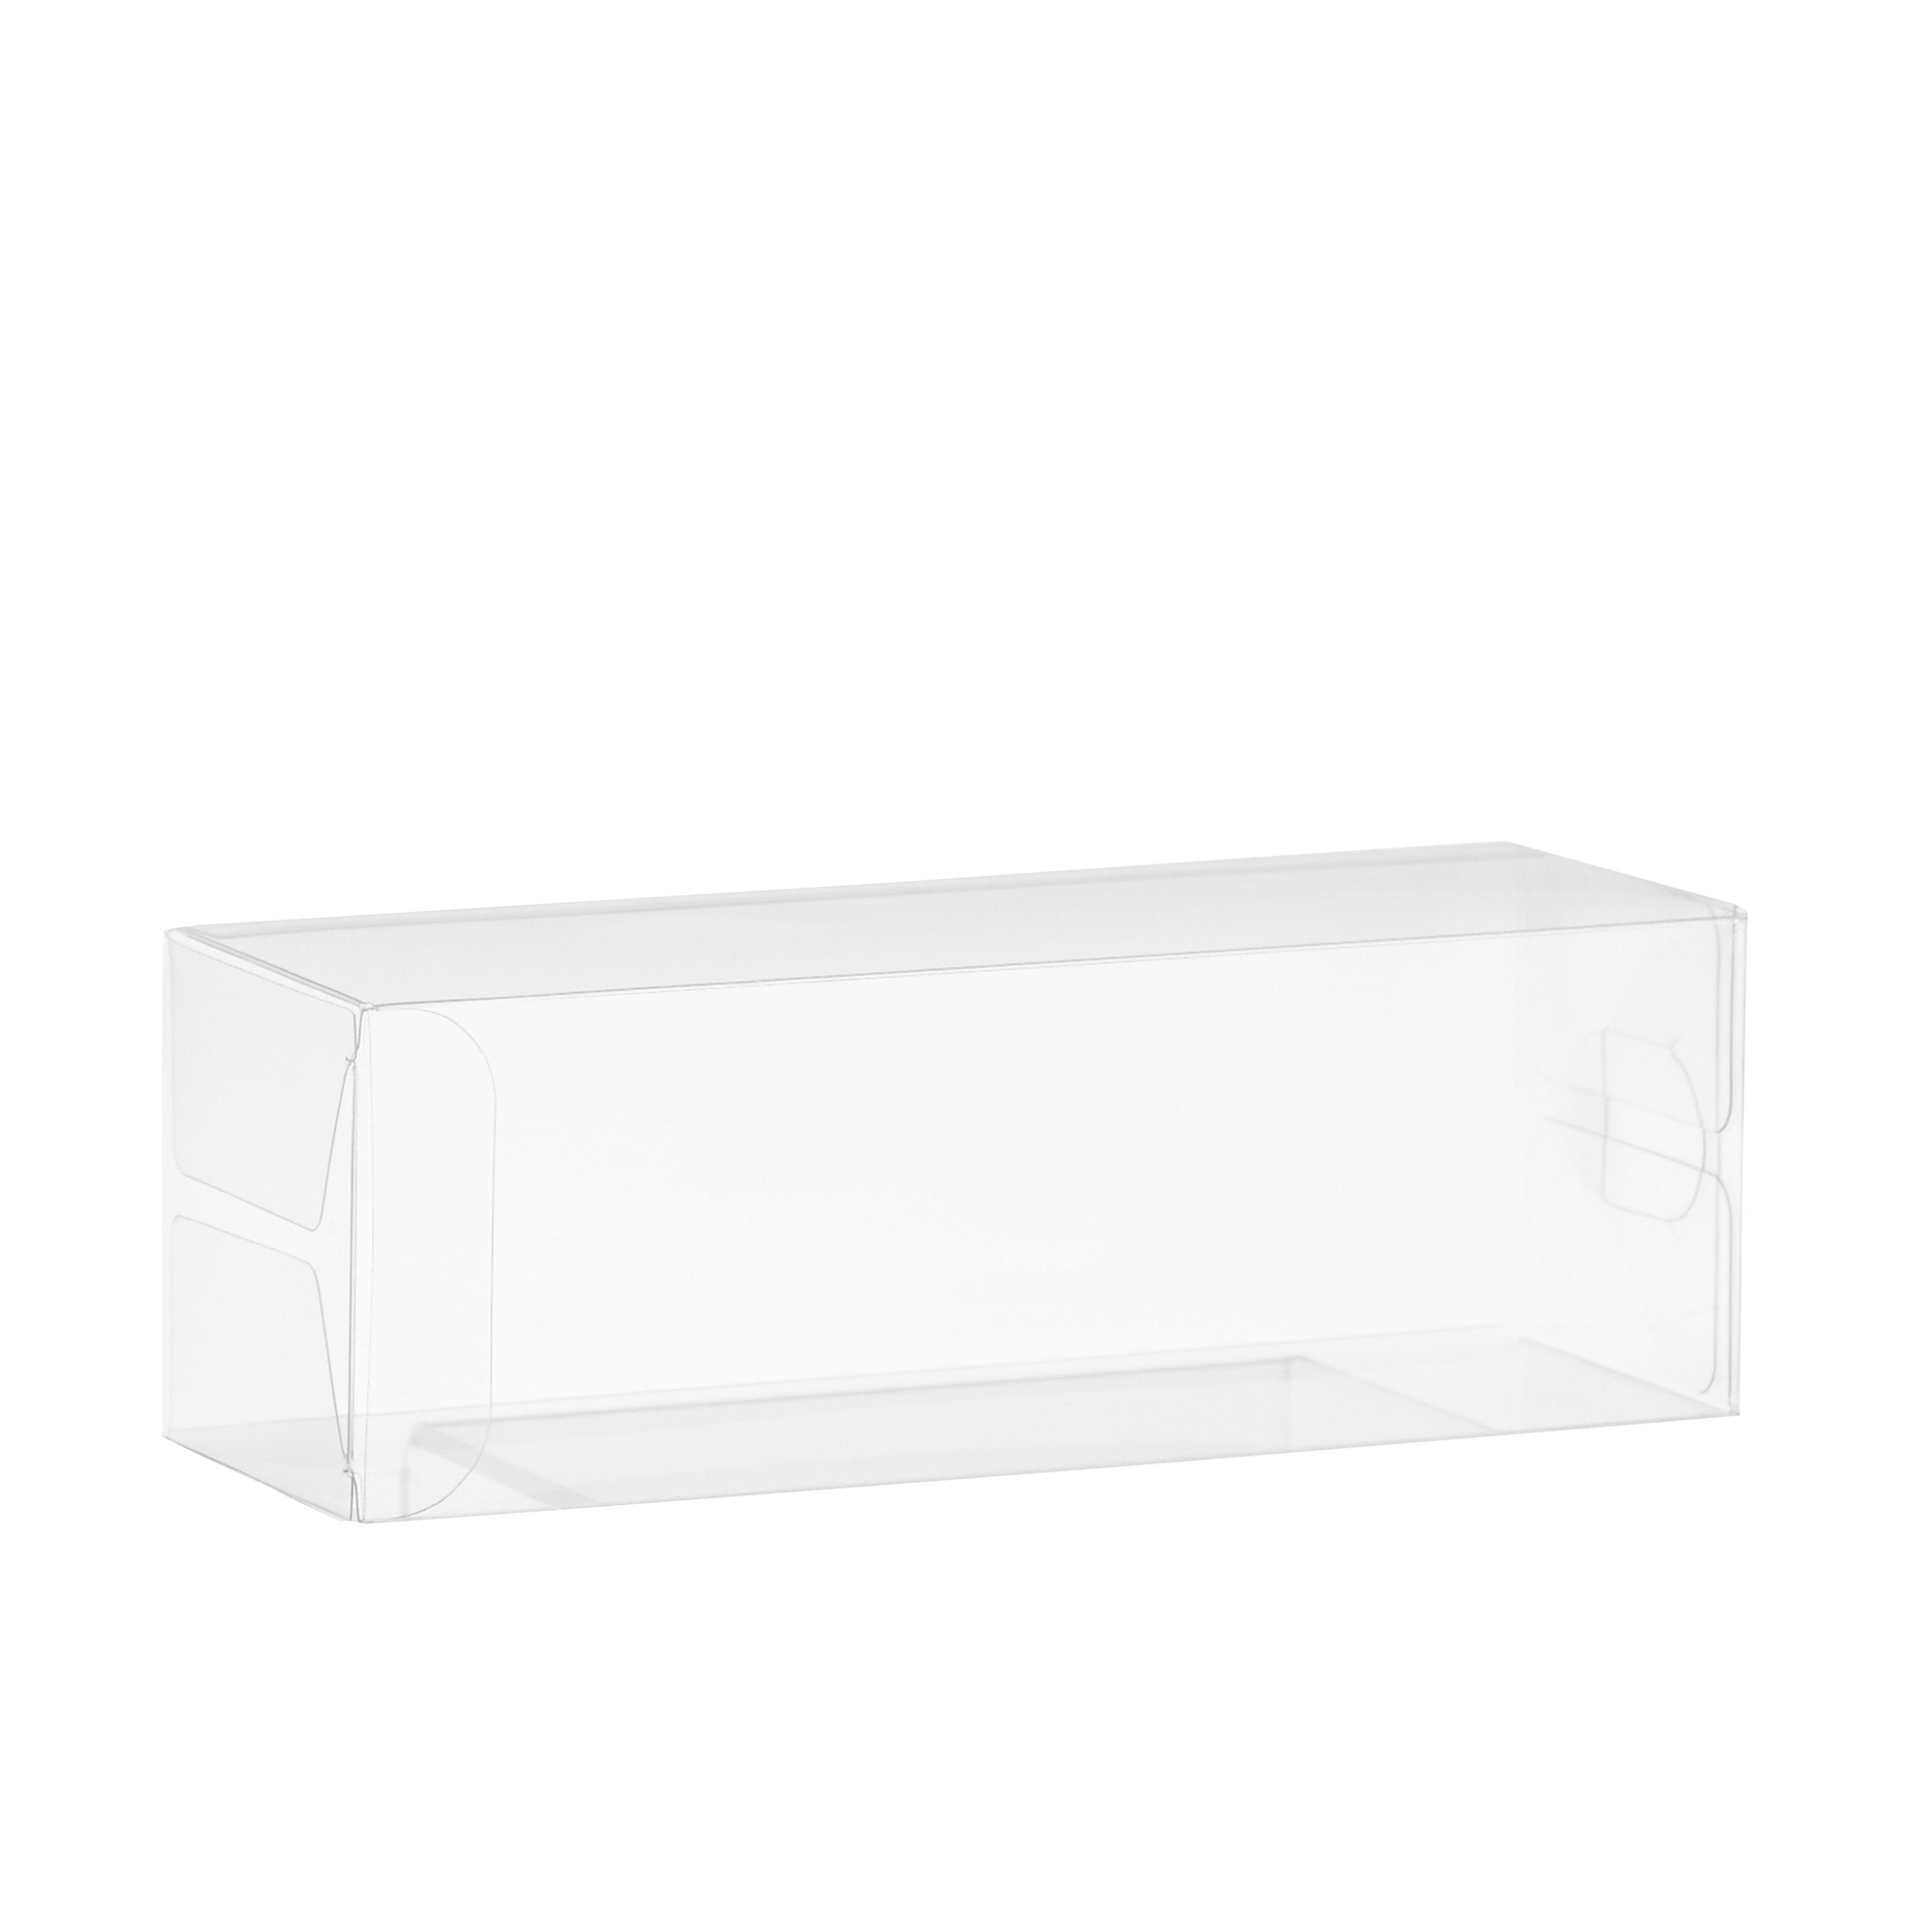 50-Pack 2x2x6 Clear Boxes - Plastic Gift Boxes for Macaron, Candy, Treats,  Wedding, Baby Shower, Birthday Party, Retail 